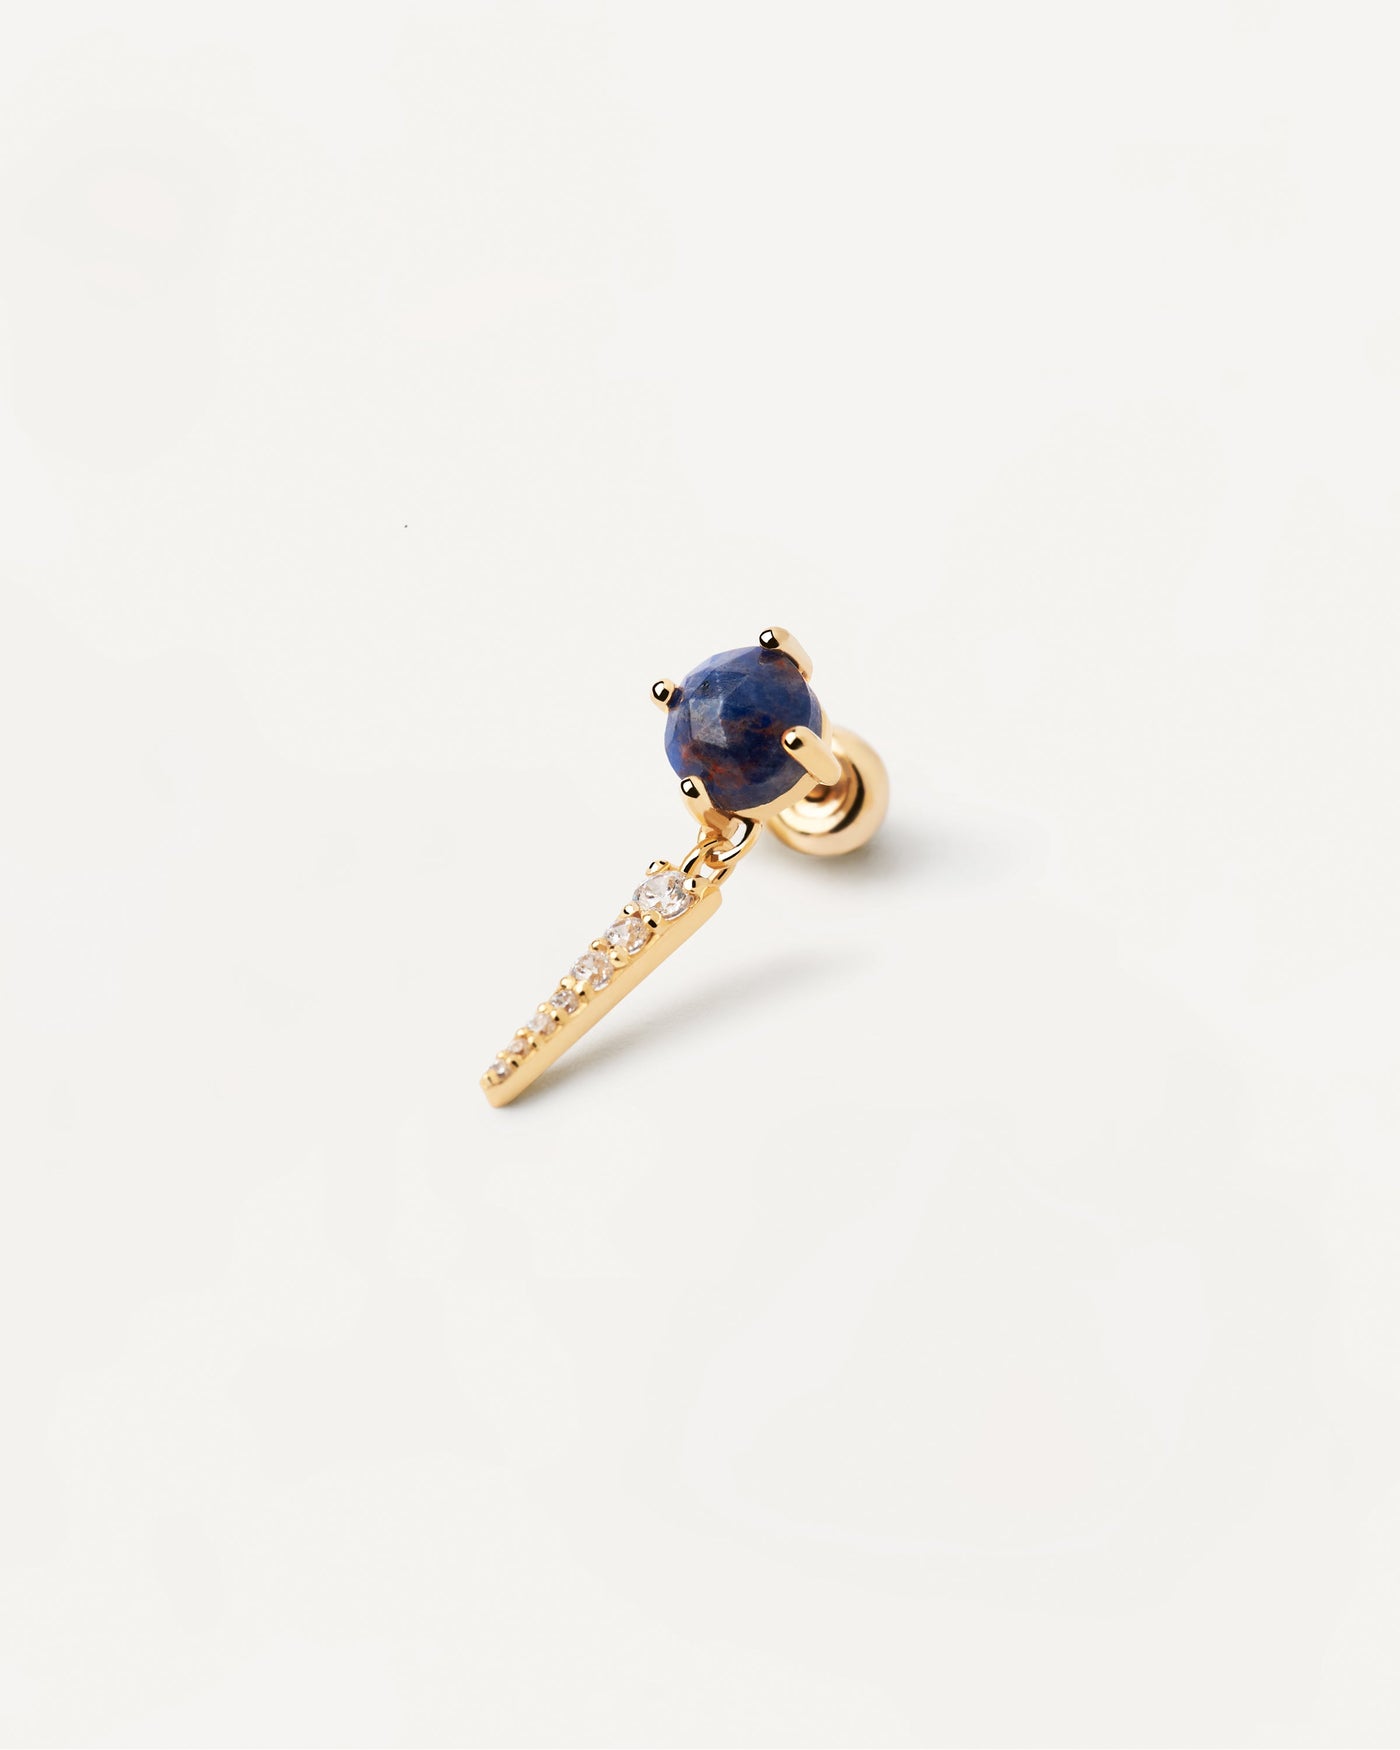 2023 Selection | Yoki Sodalite Single Earring. Gold-plated ear piercing with dark blue gemstone and white zirconia pendant. Get the latest arrival from PDPAOLA. Place your order safely and get this Best Seller. Free Shipping.